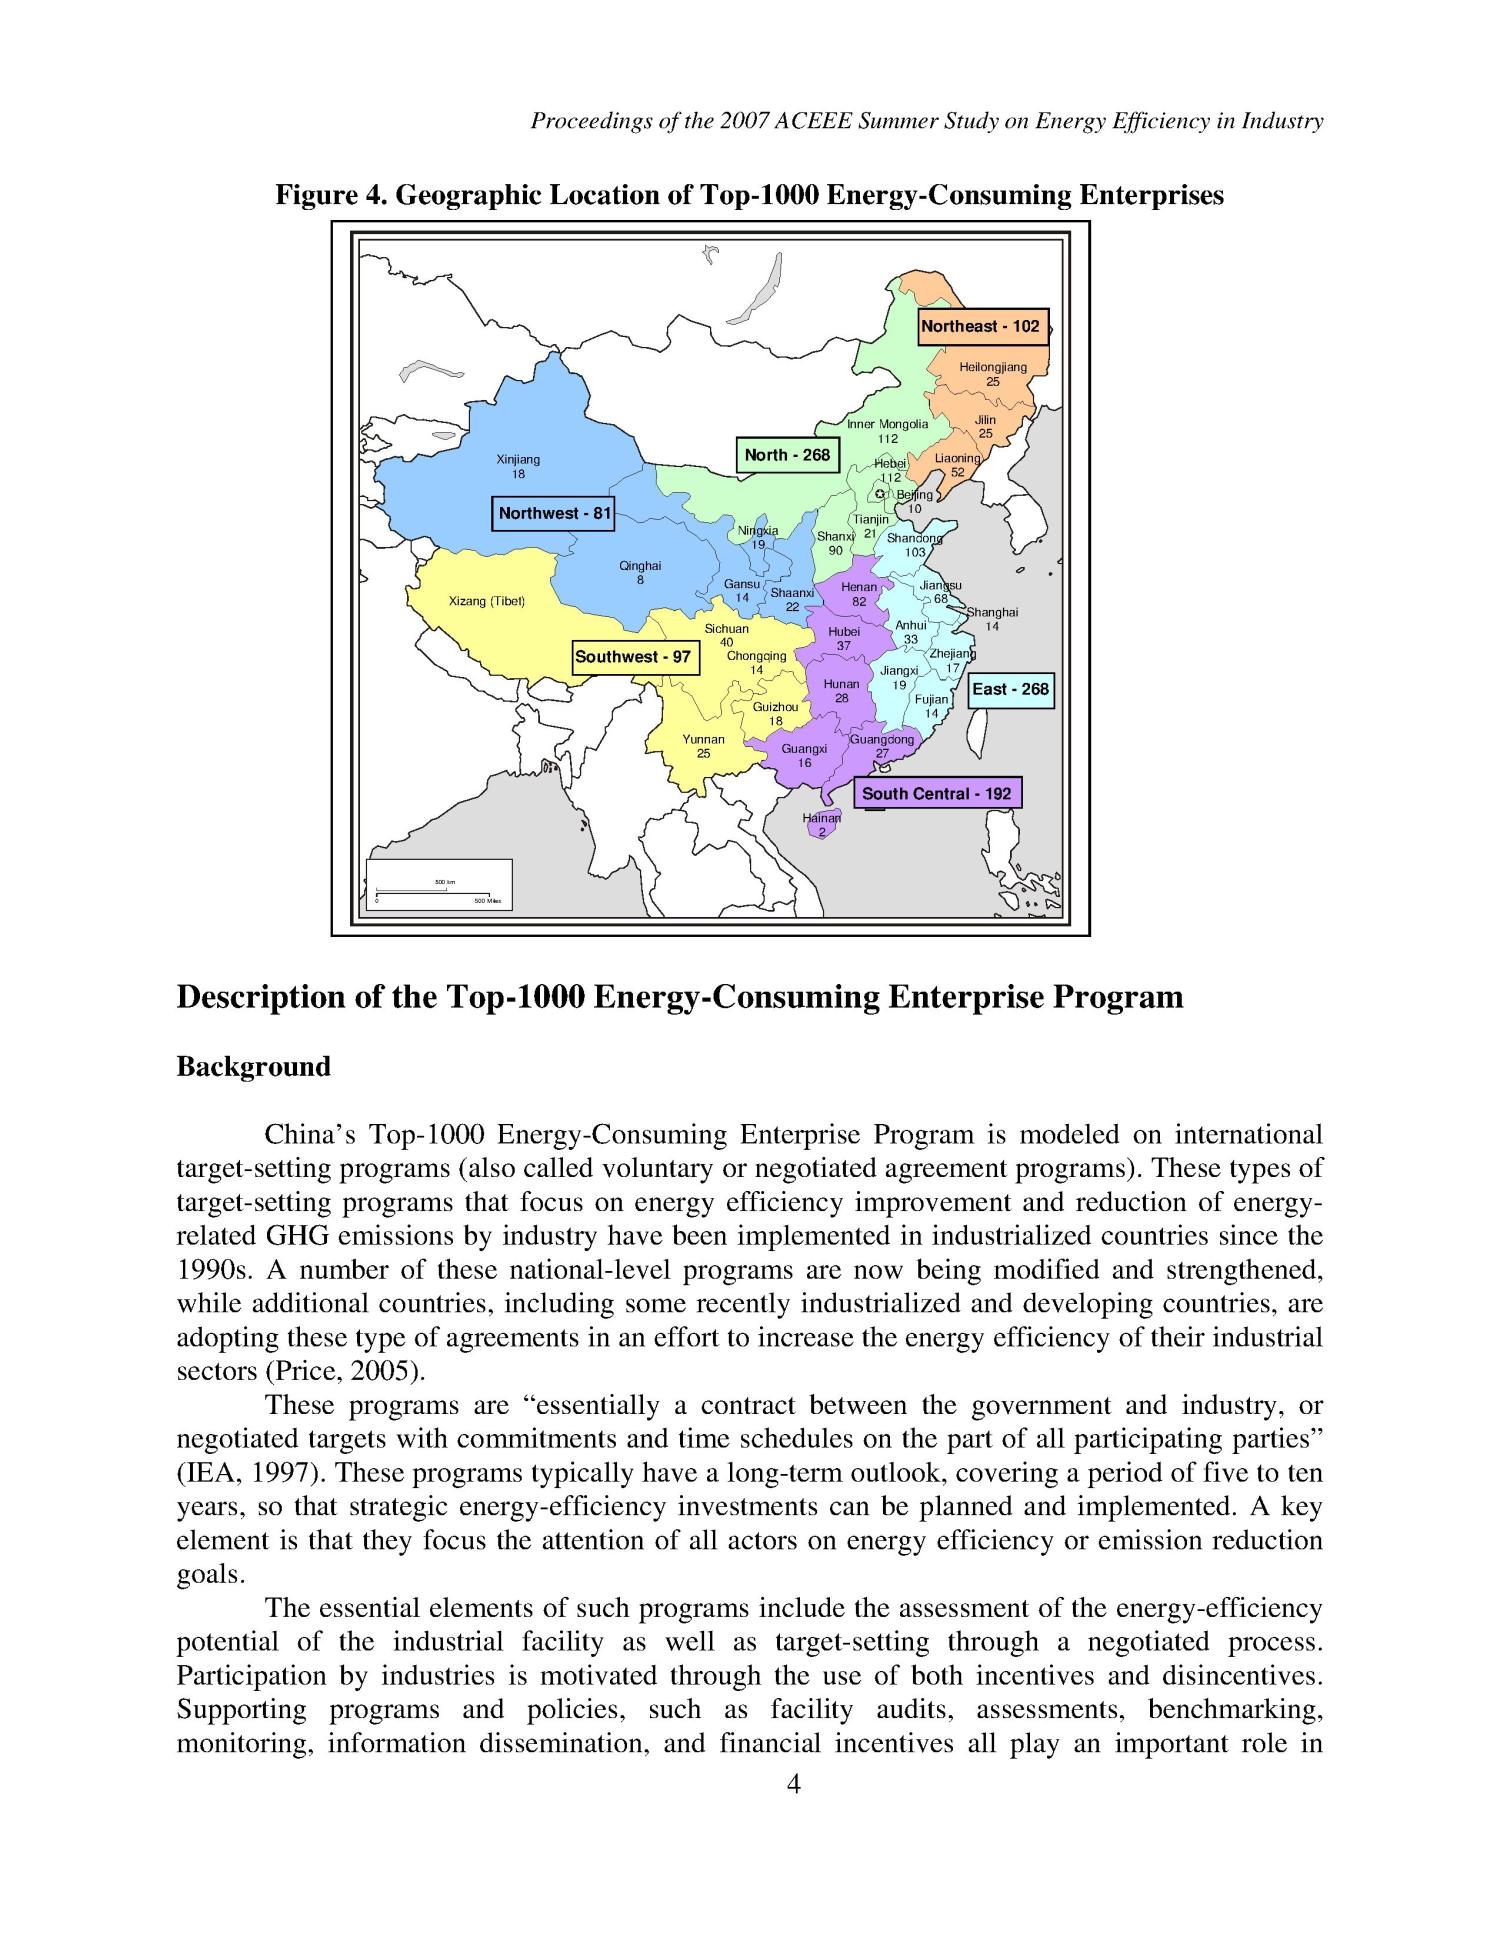 Constraining Energy Consumption of China's Largest IndustrialEnterprises Through the Top-1000 Energy-Consuming EnterpriseProgram
                                                
                                                    [Sequence #]: 4 of 12
                                                